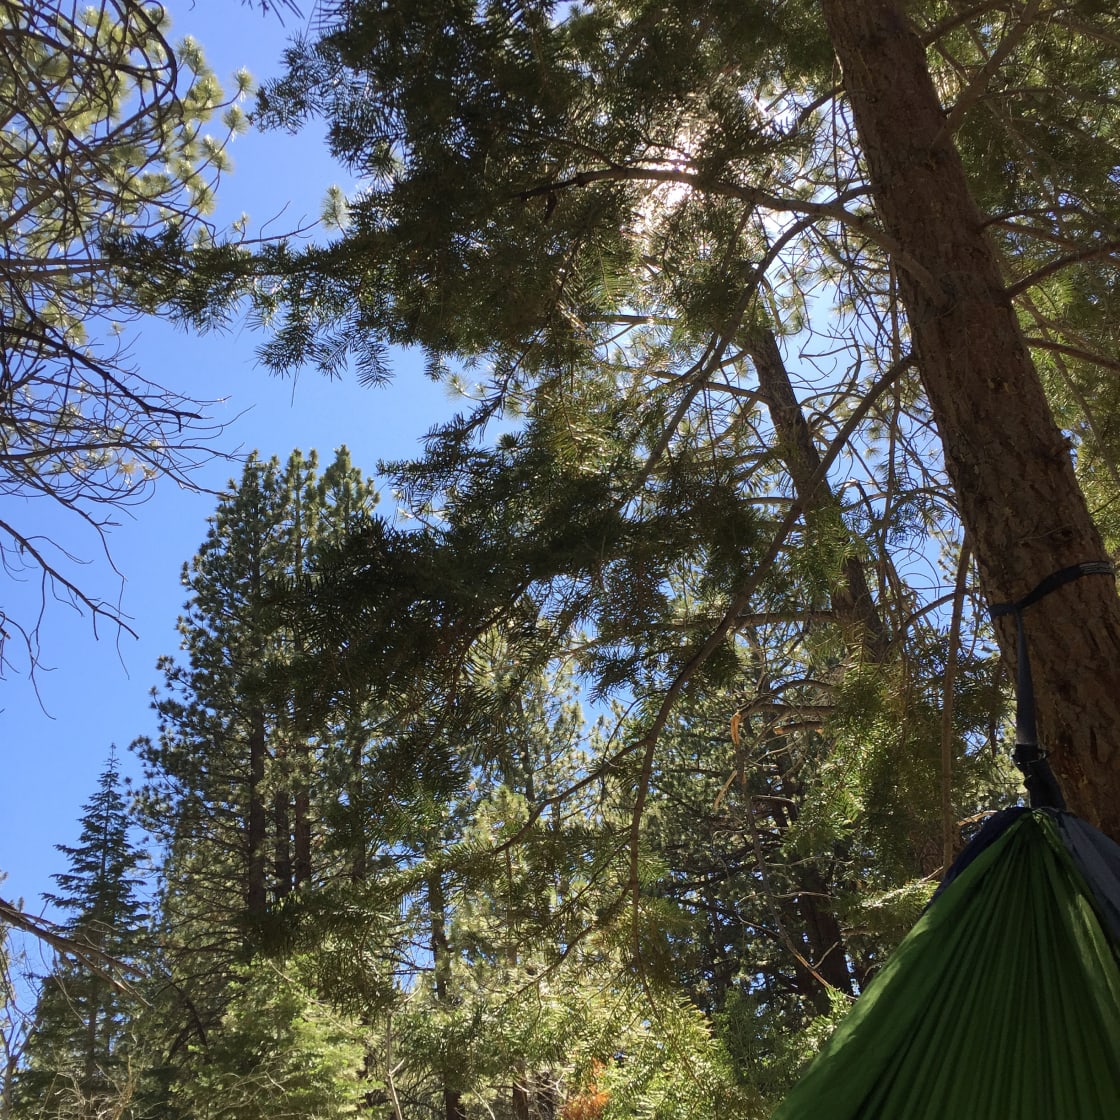 View from my hammock